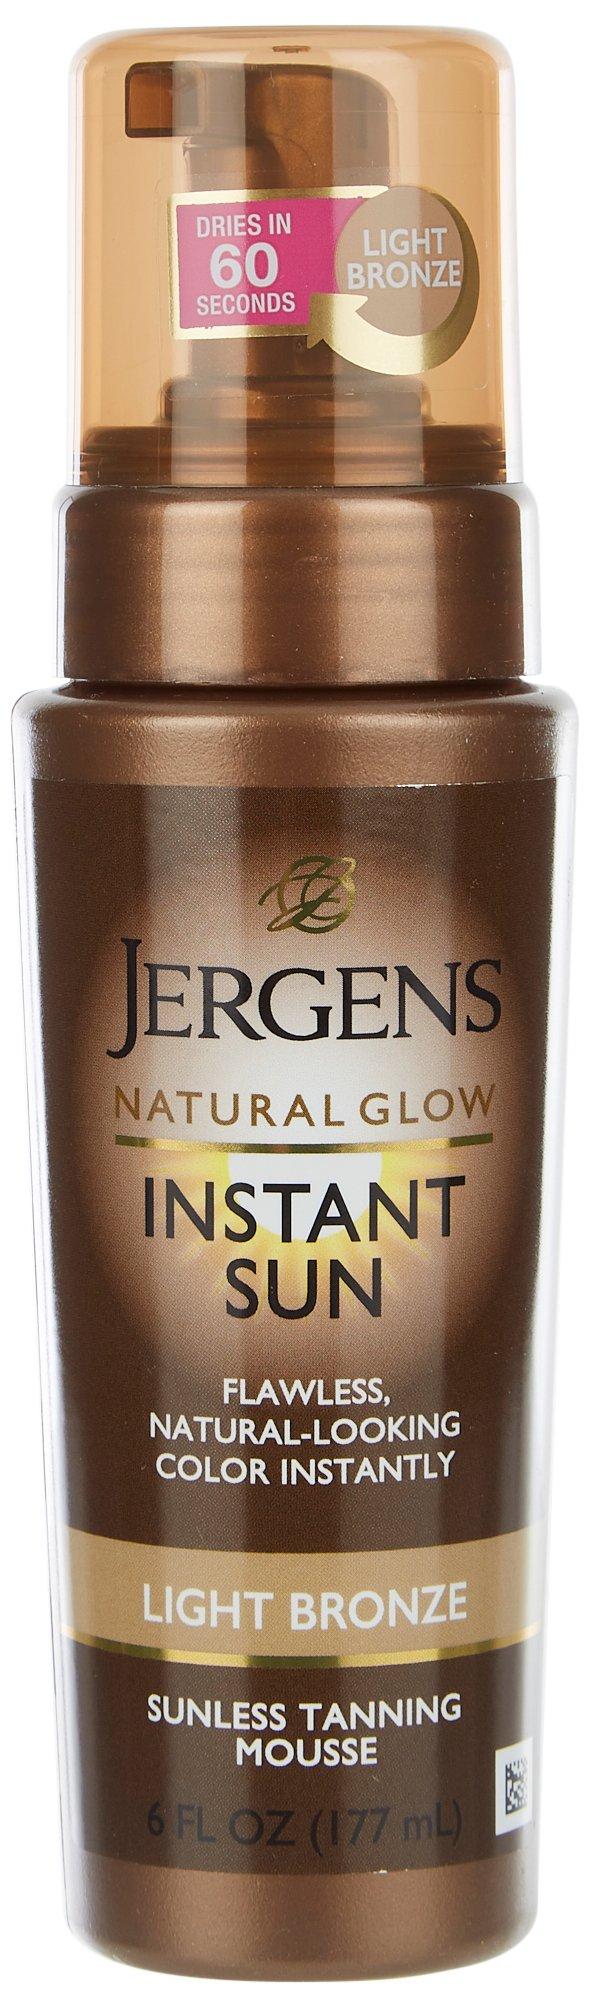 Jergens Natural Glow Light Bronze Sunless Tanning Mousse